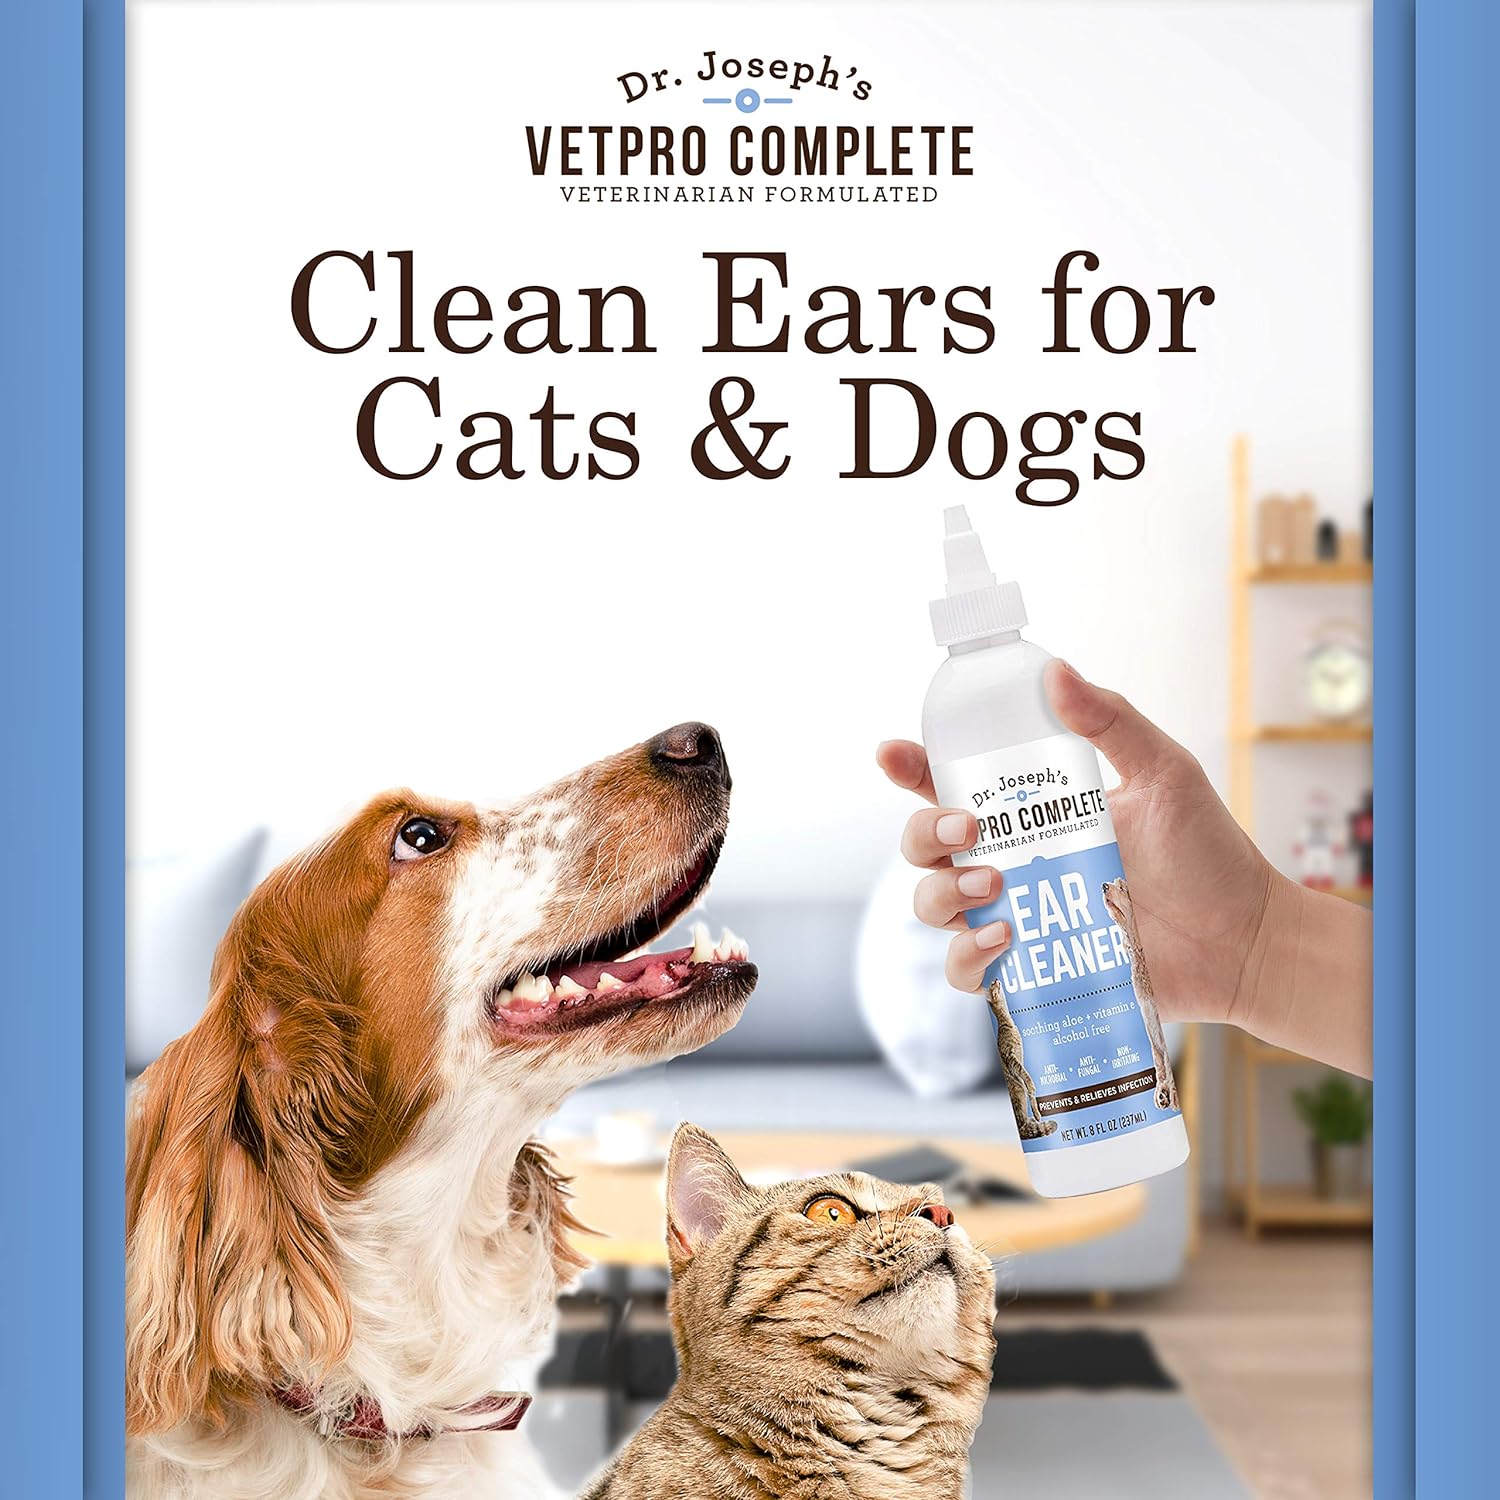 VetPro Complete Dog Ear Cleaner, 8 Ounces, Gentle Dog and Cat Ear Cleaner Solution Wash with Aloe and Vitamin E, Dog Ear Drops to Remove Wax and Debris, Reduces Odor : Pet Supplies